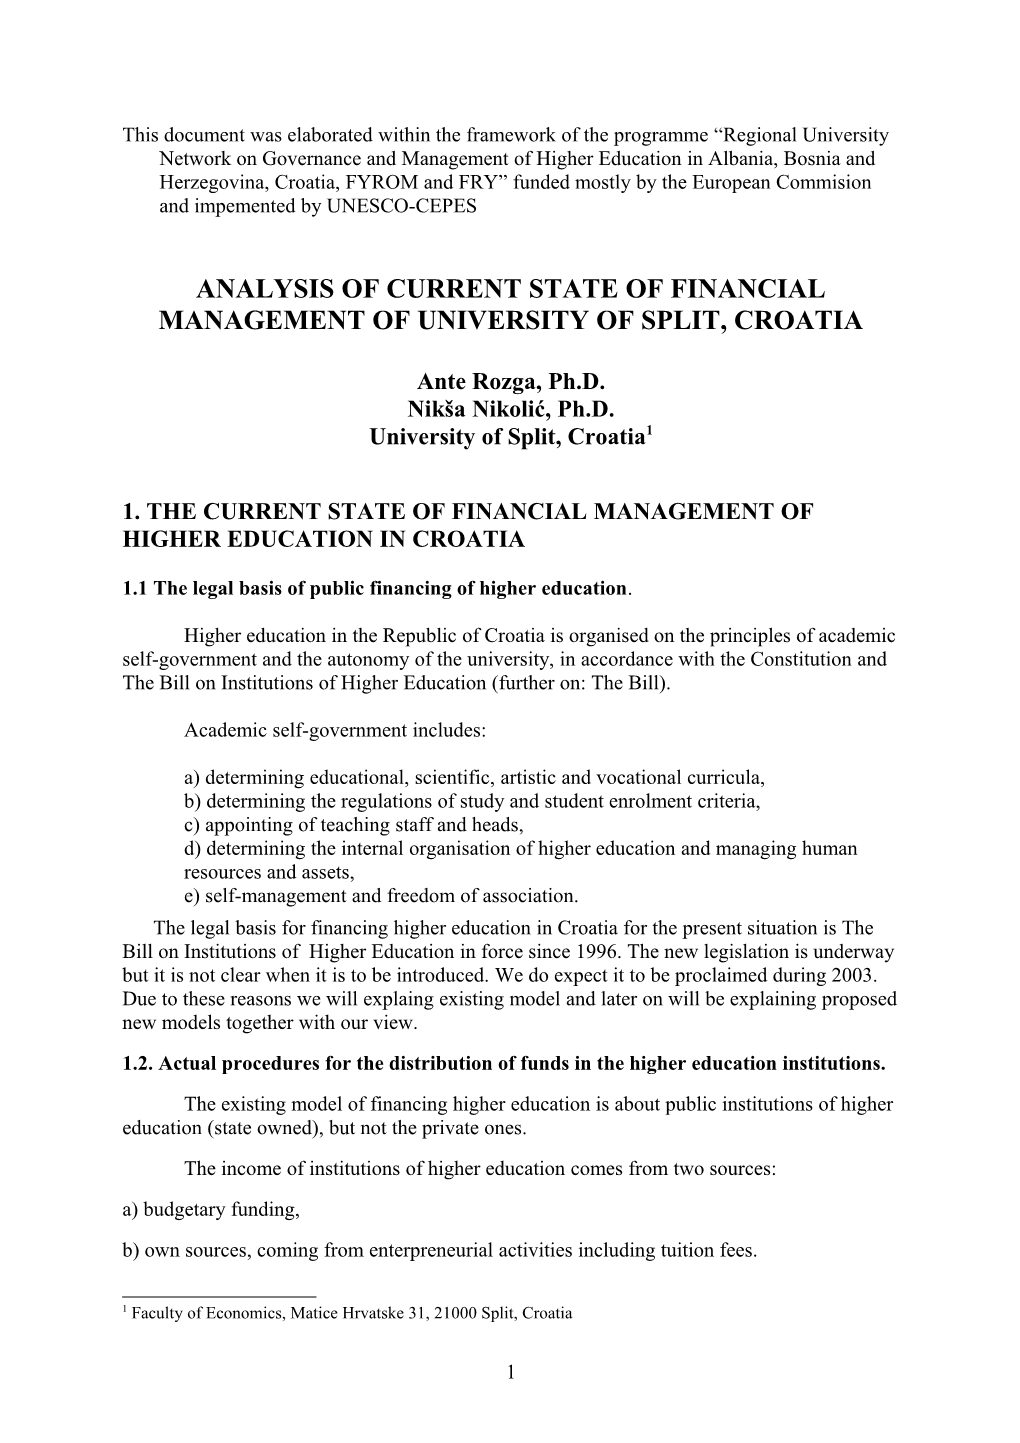 Analysis of Current State of Financial Management of University of Split, Croatia